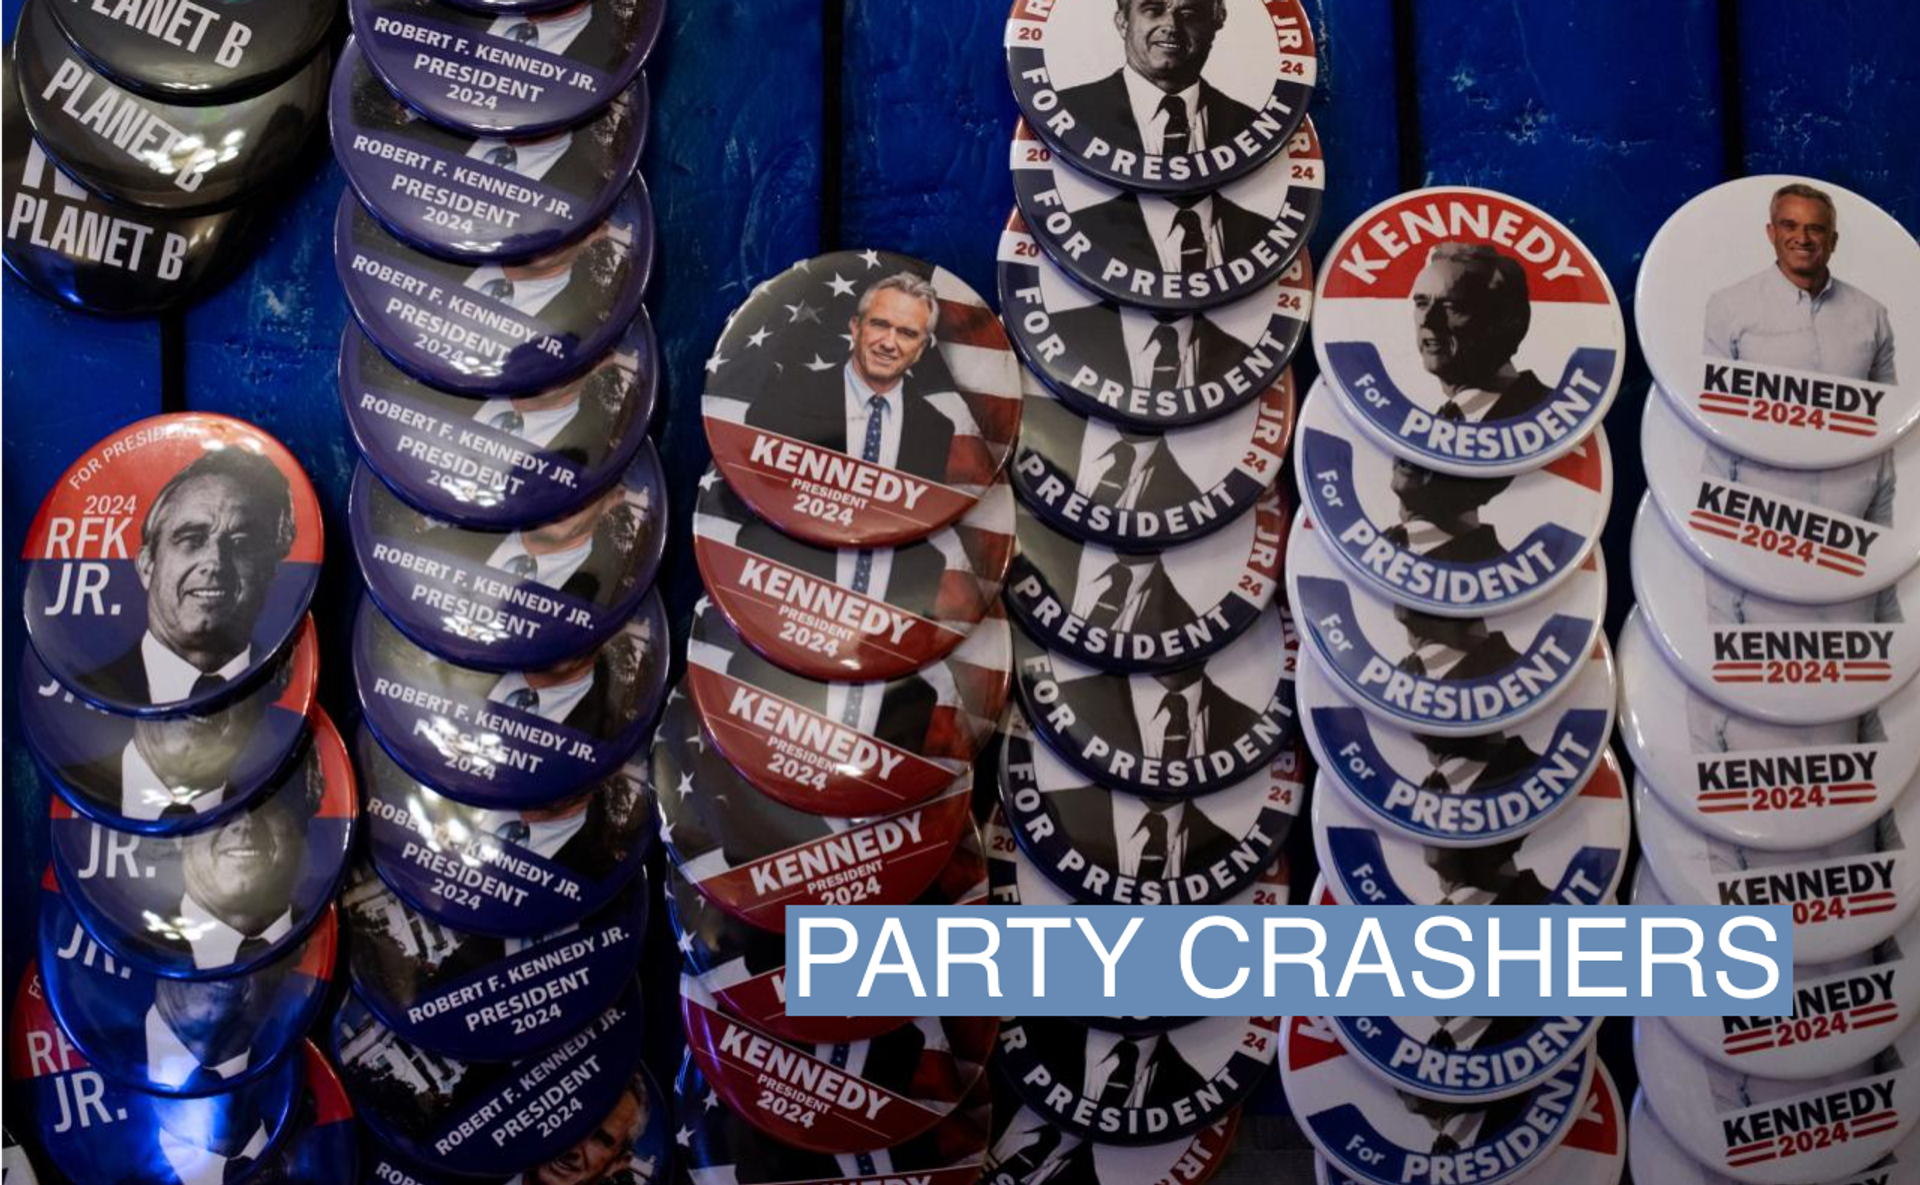 Pins and other merchandise in support of independent presidential candidate Robert F. Kennedy Jr. on display during a voter rally on Feb. 10, 2023 in Grand Rapids, Mich.